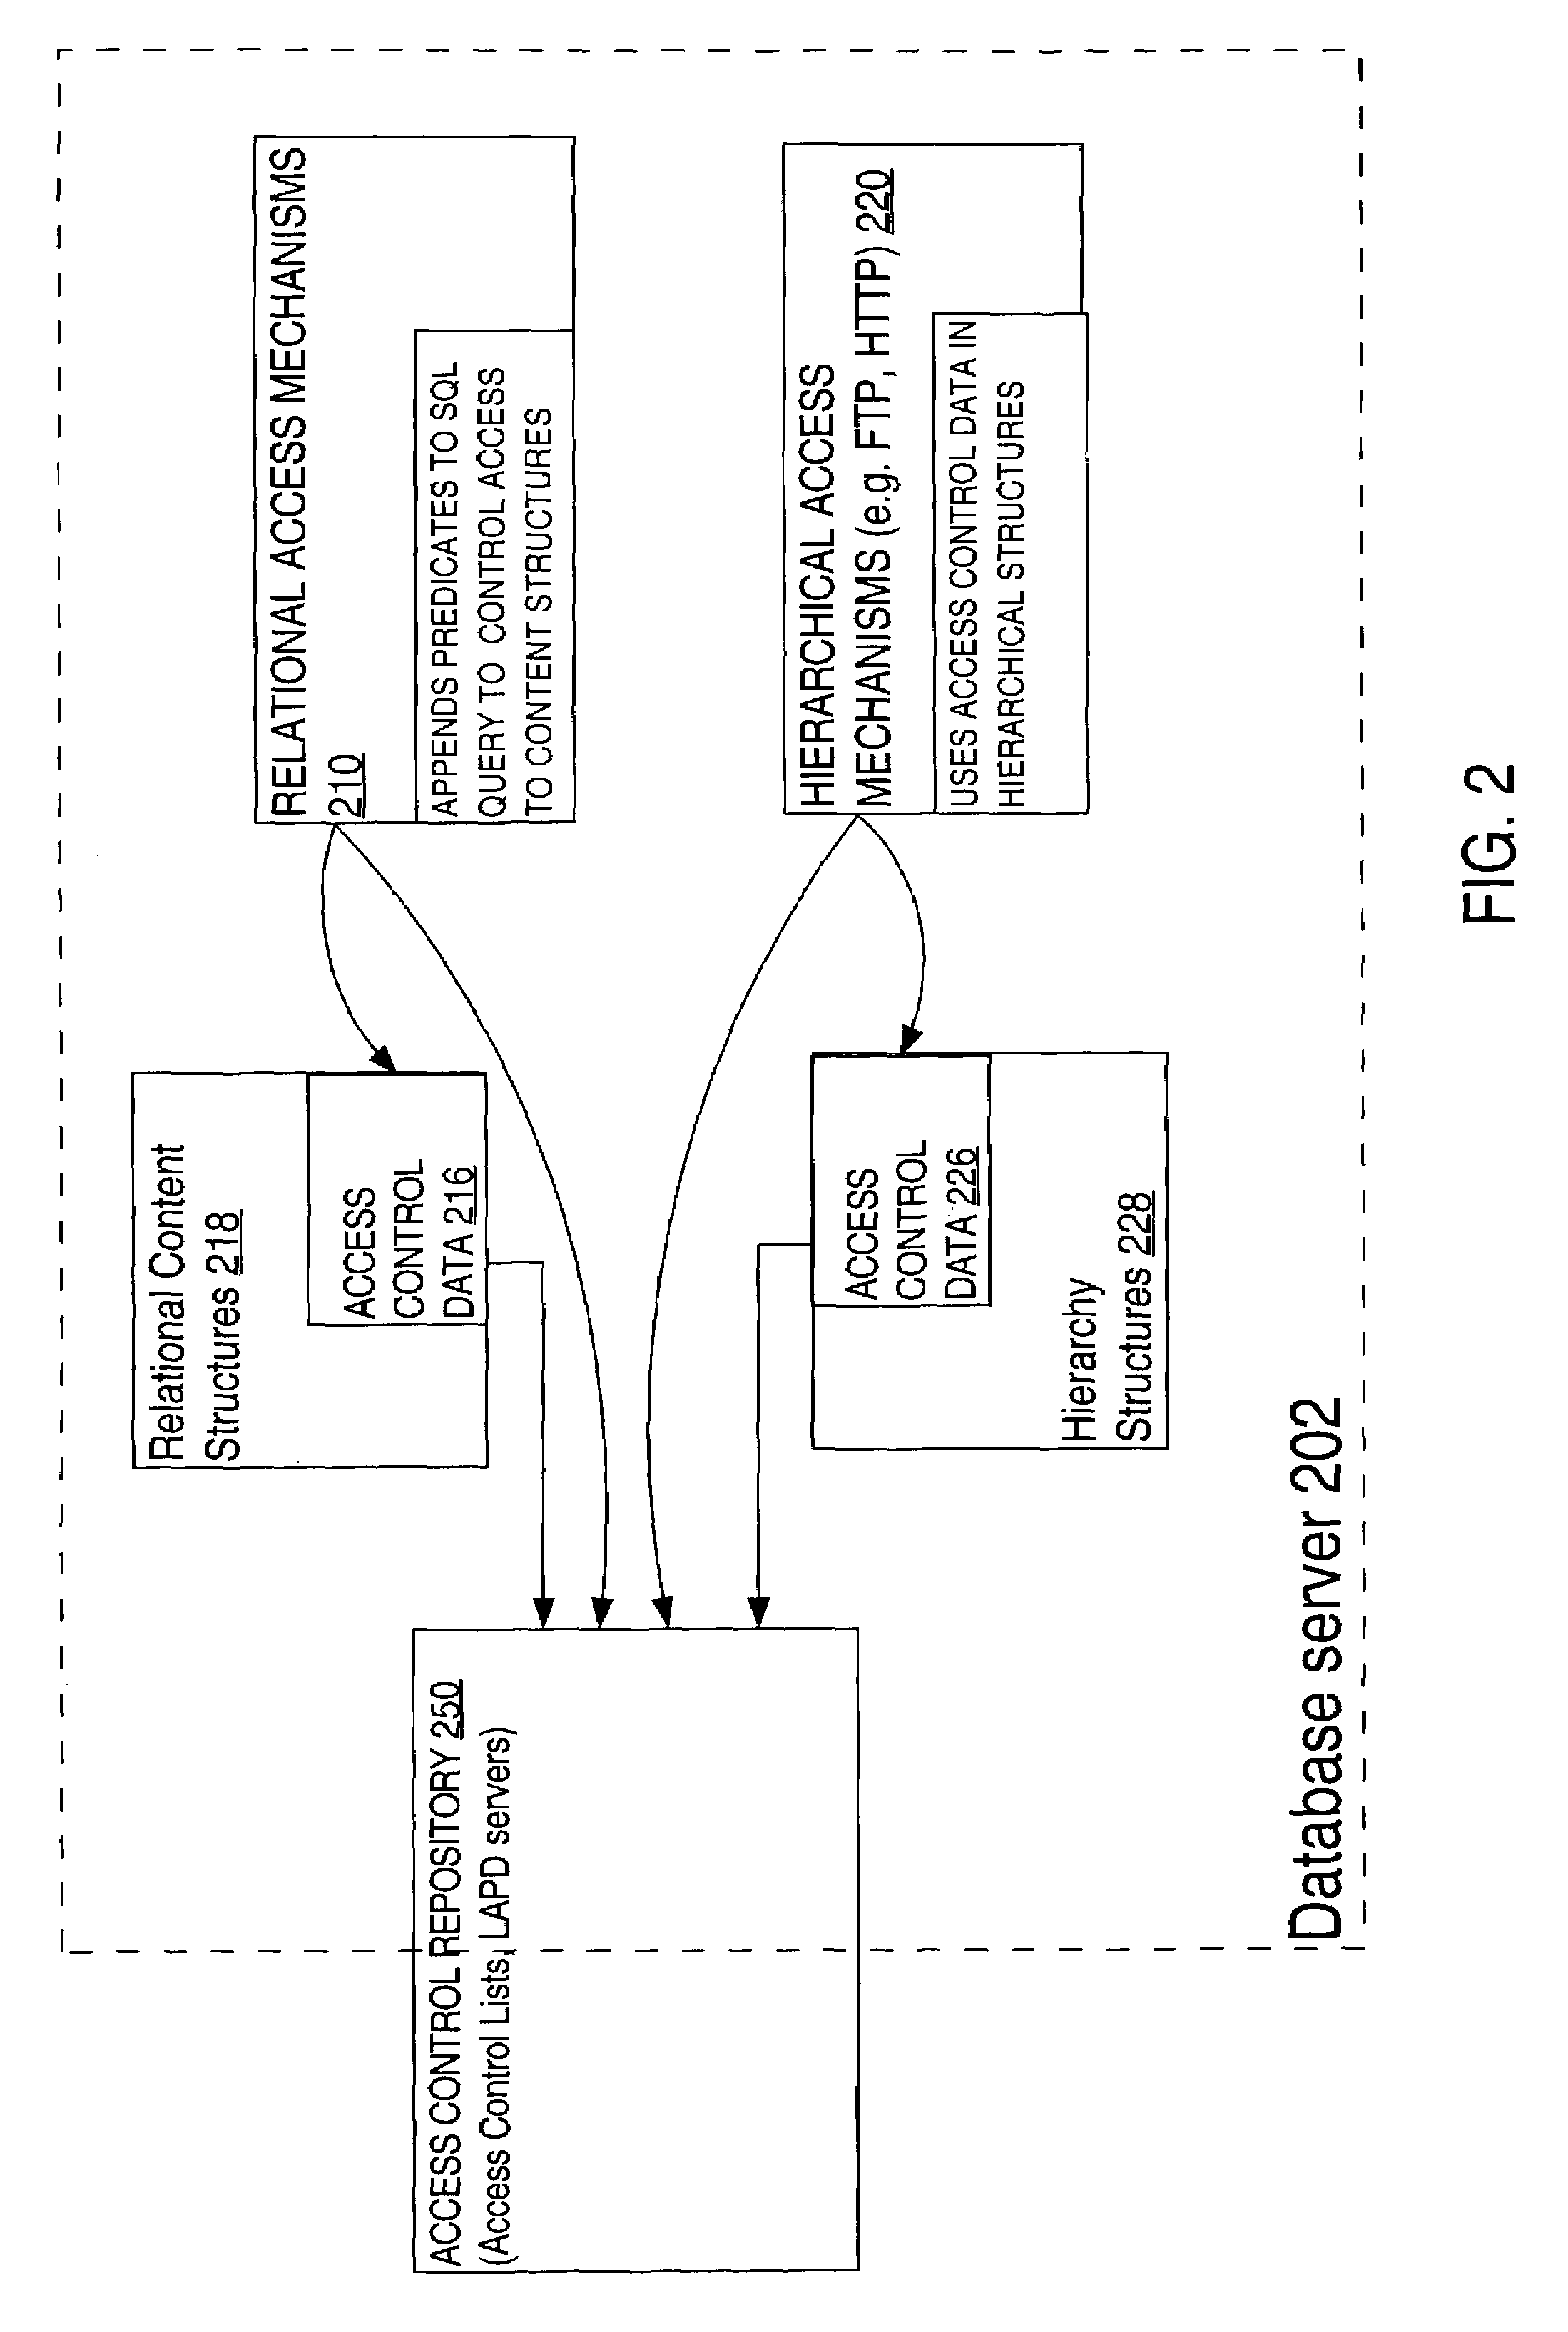 Mechanism for uniform access control in a database system